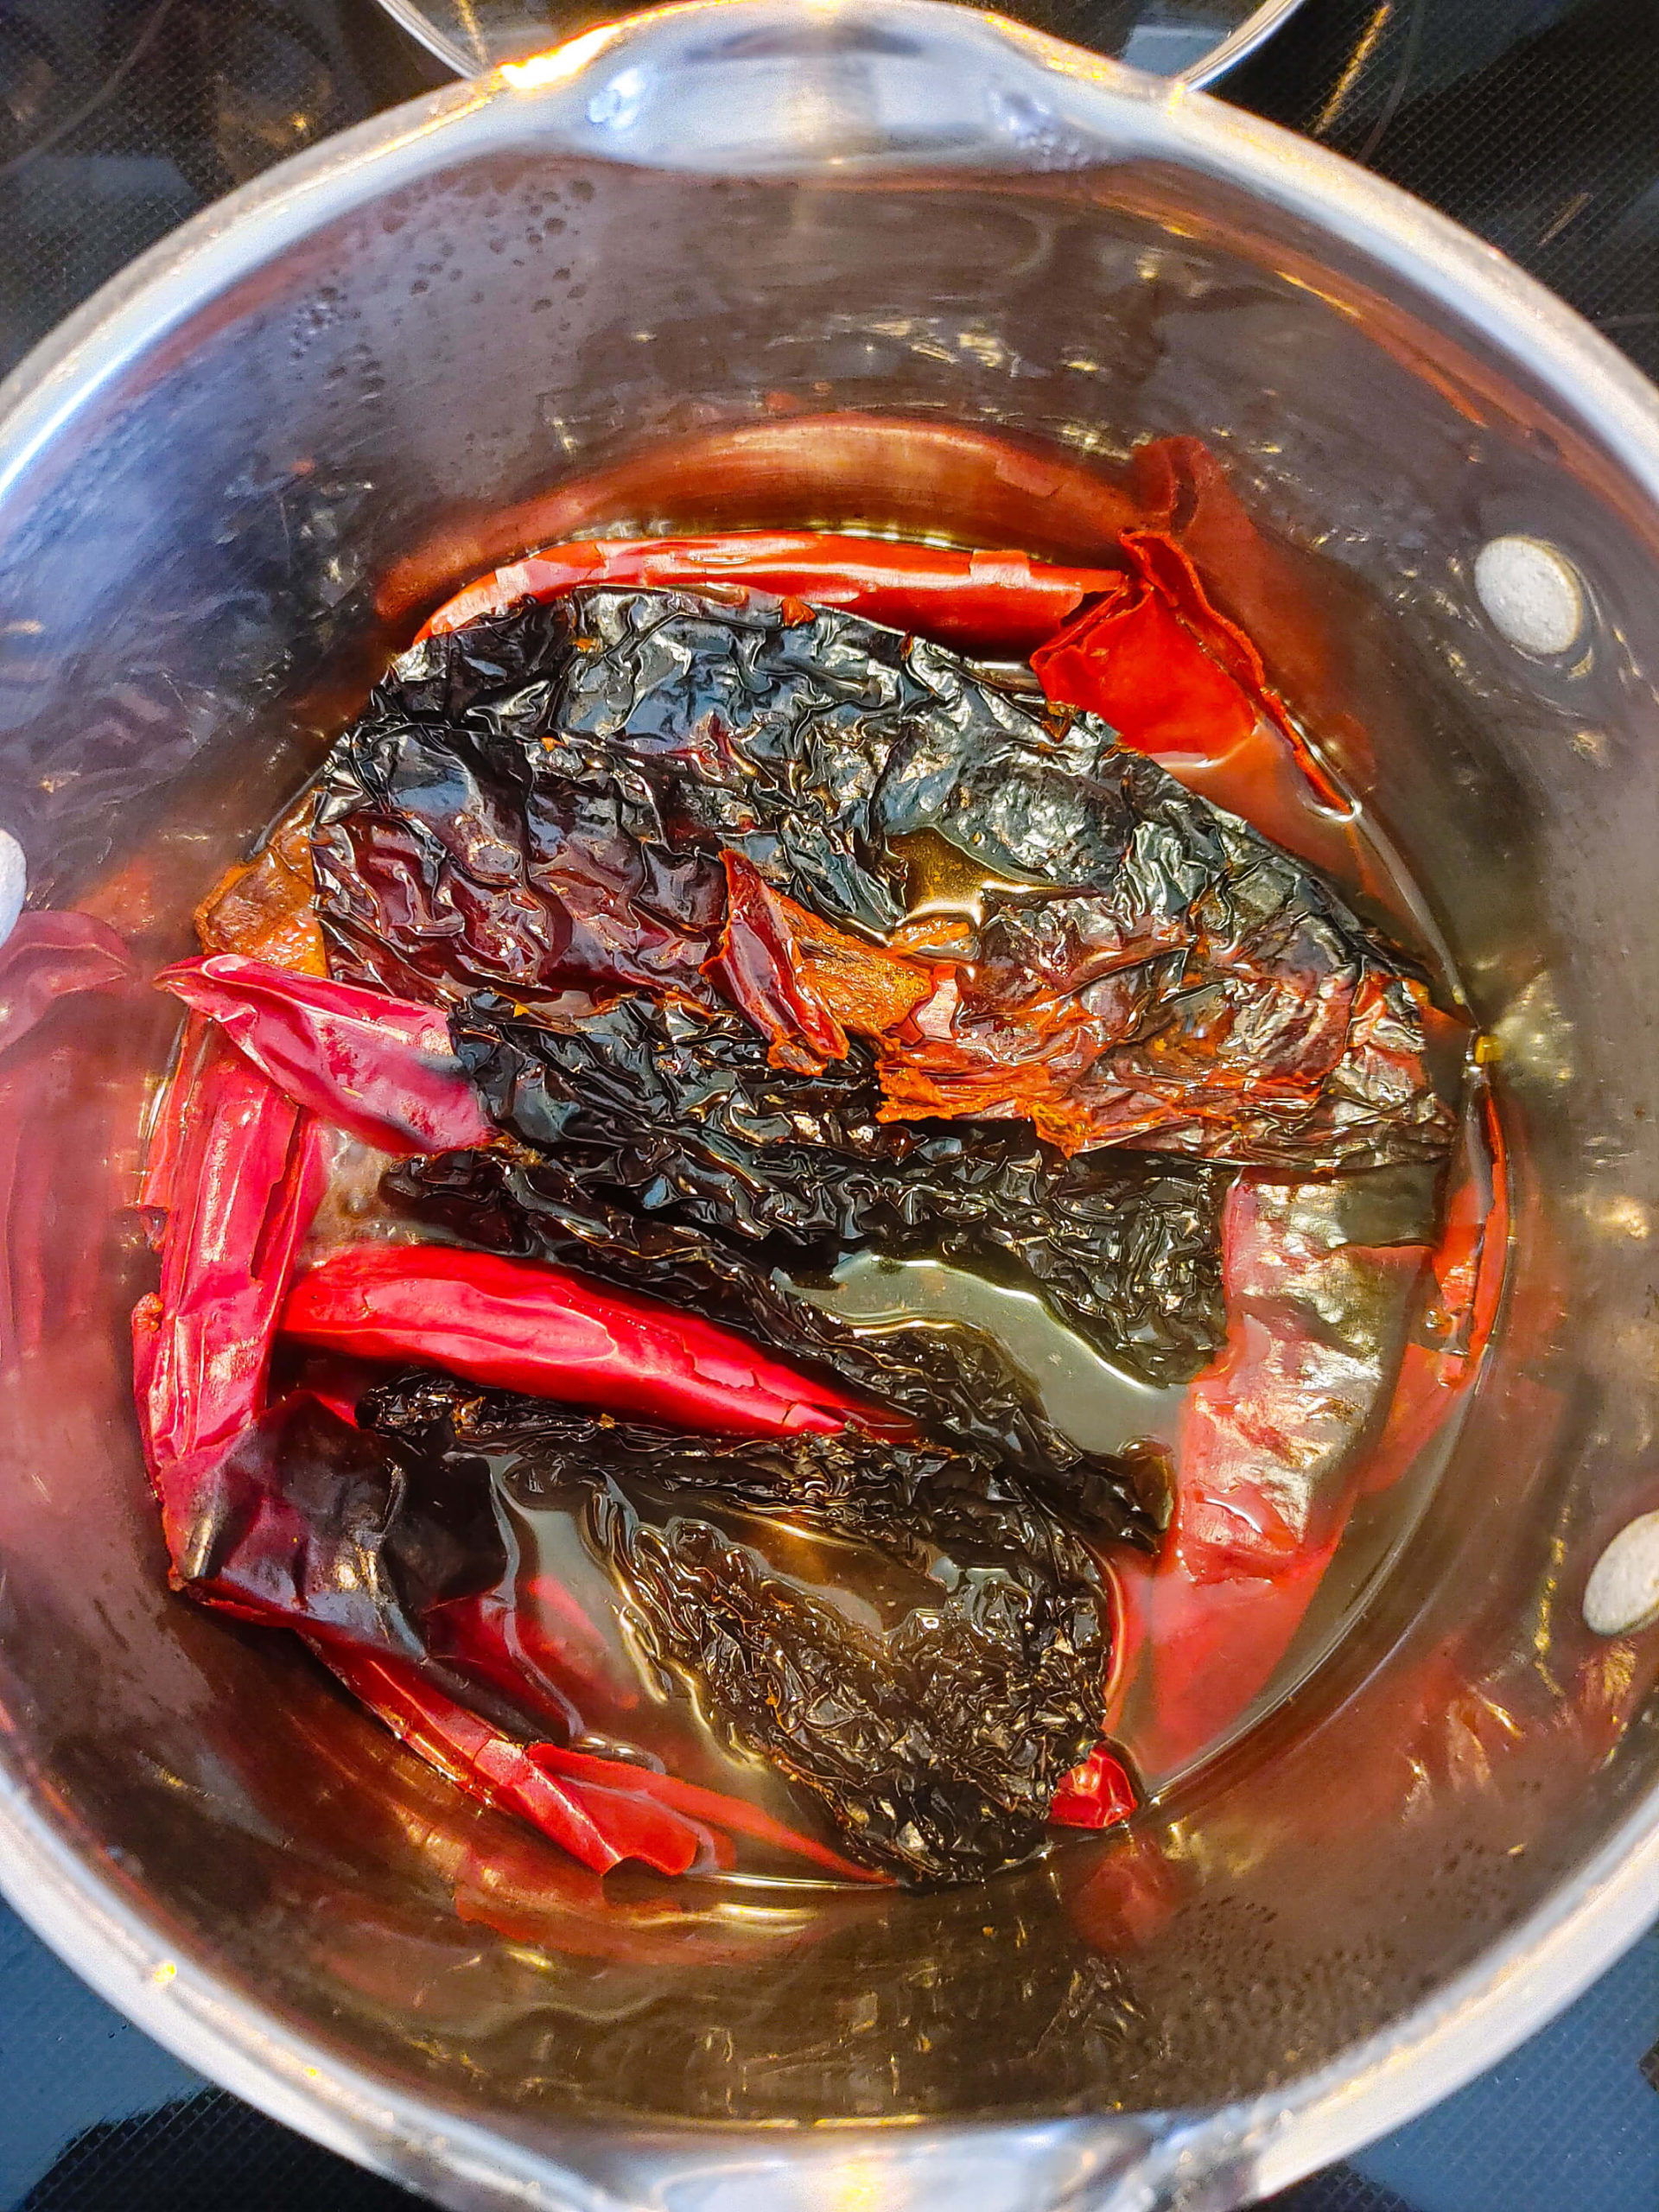 SOAK THE PEPPERS IN BOILING WATER OR CHICKEN BROTH